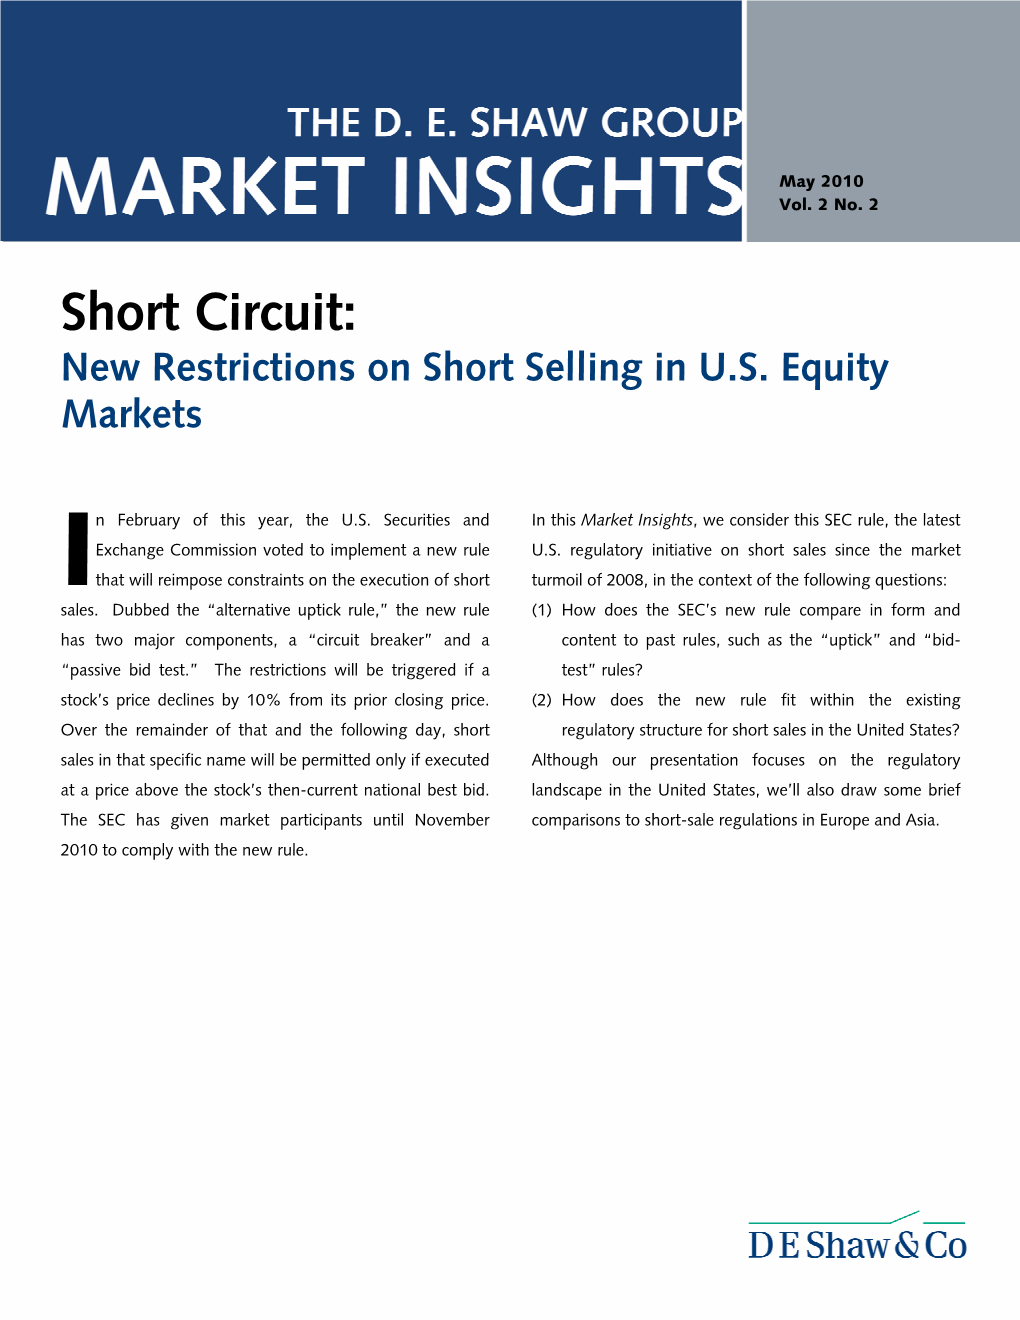 Short Circuit: New Restrictions on Short Selling in U.S